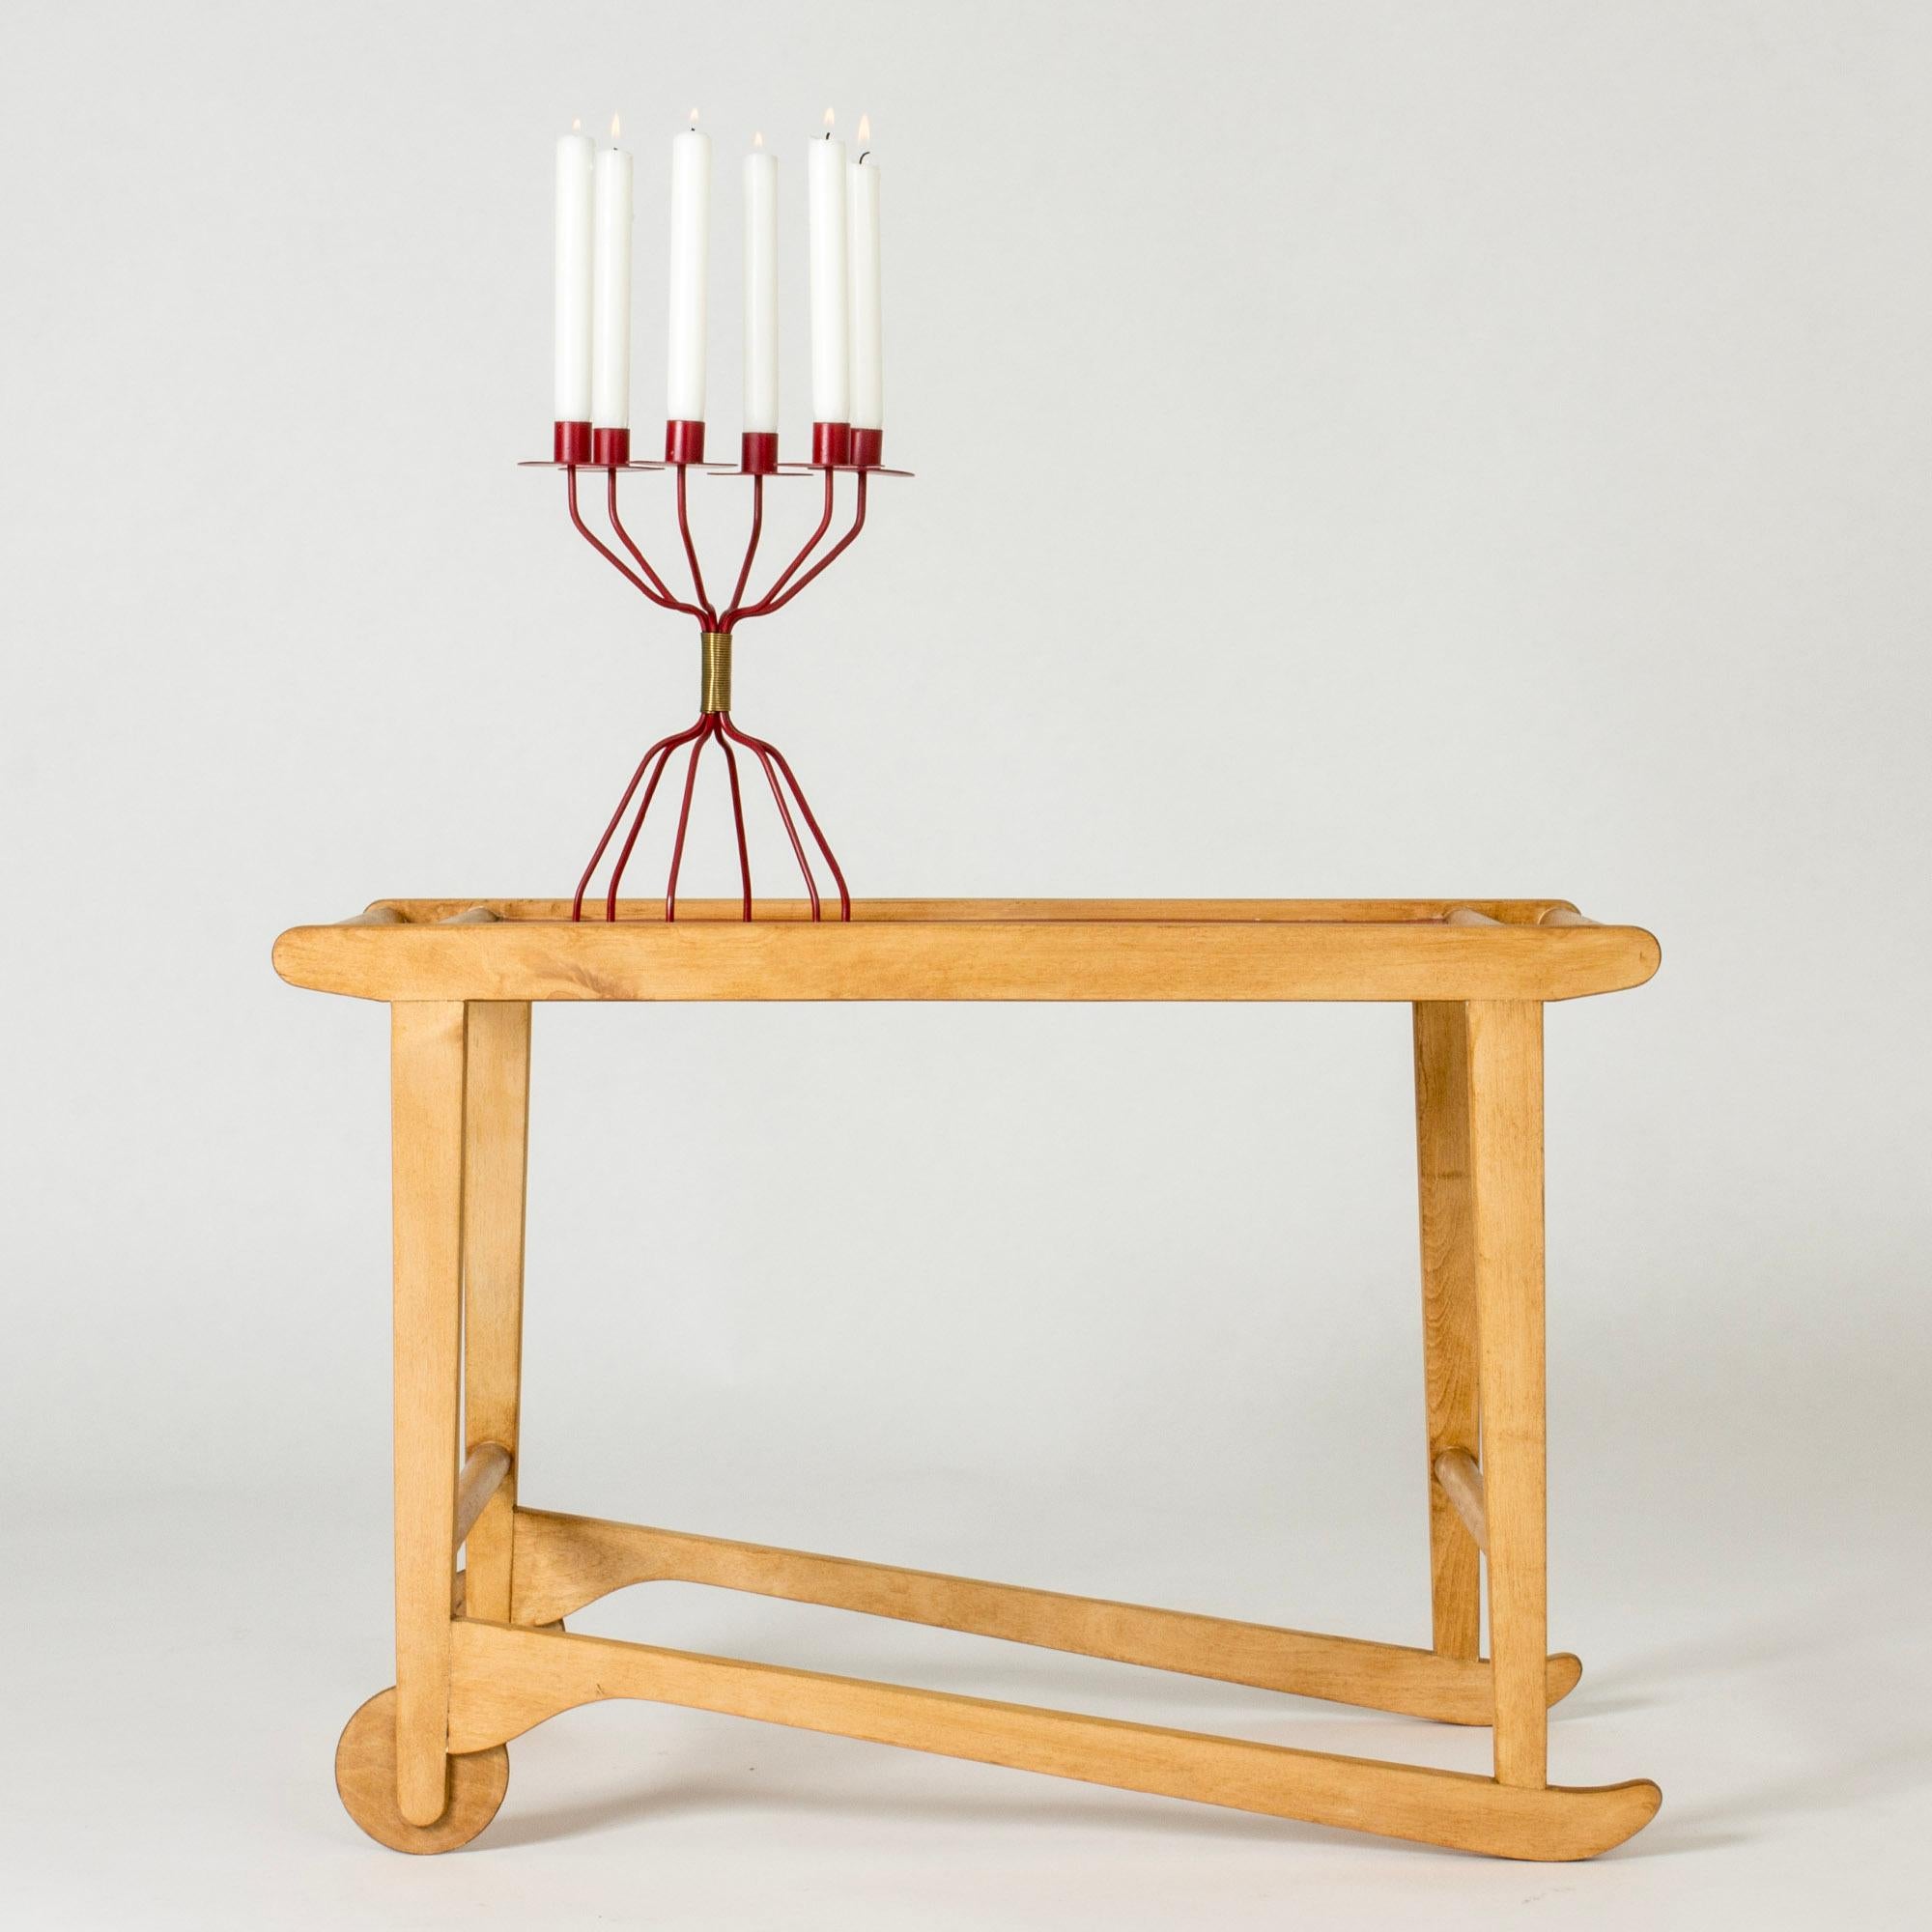 Cool serving trolley by Ilmari Tapiovaara, made from birch. Small wheels, sled legs. Table top lacquered lipstick red.